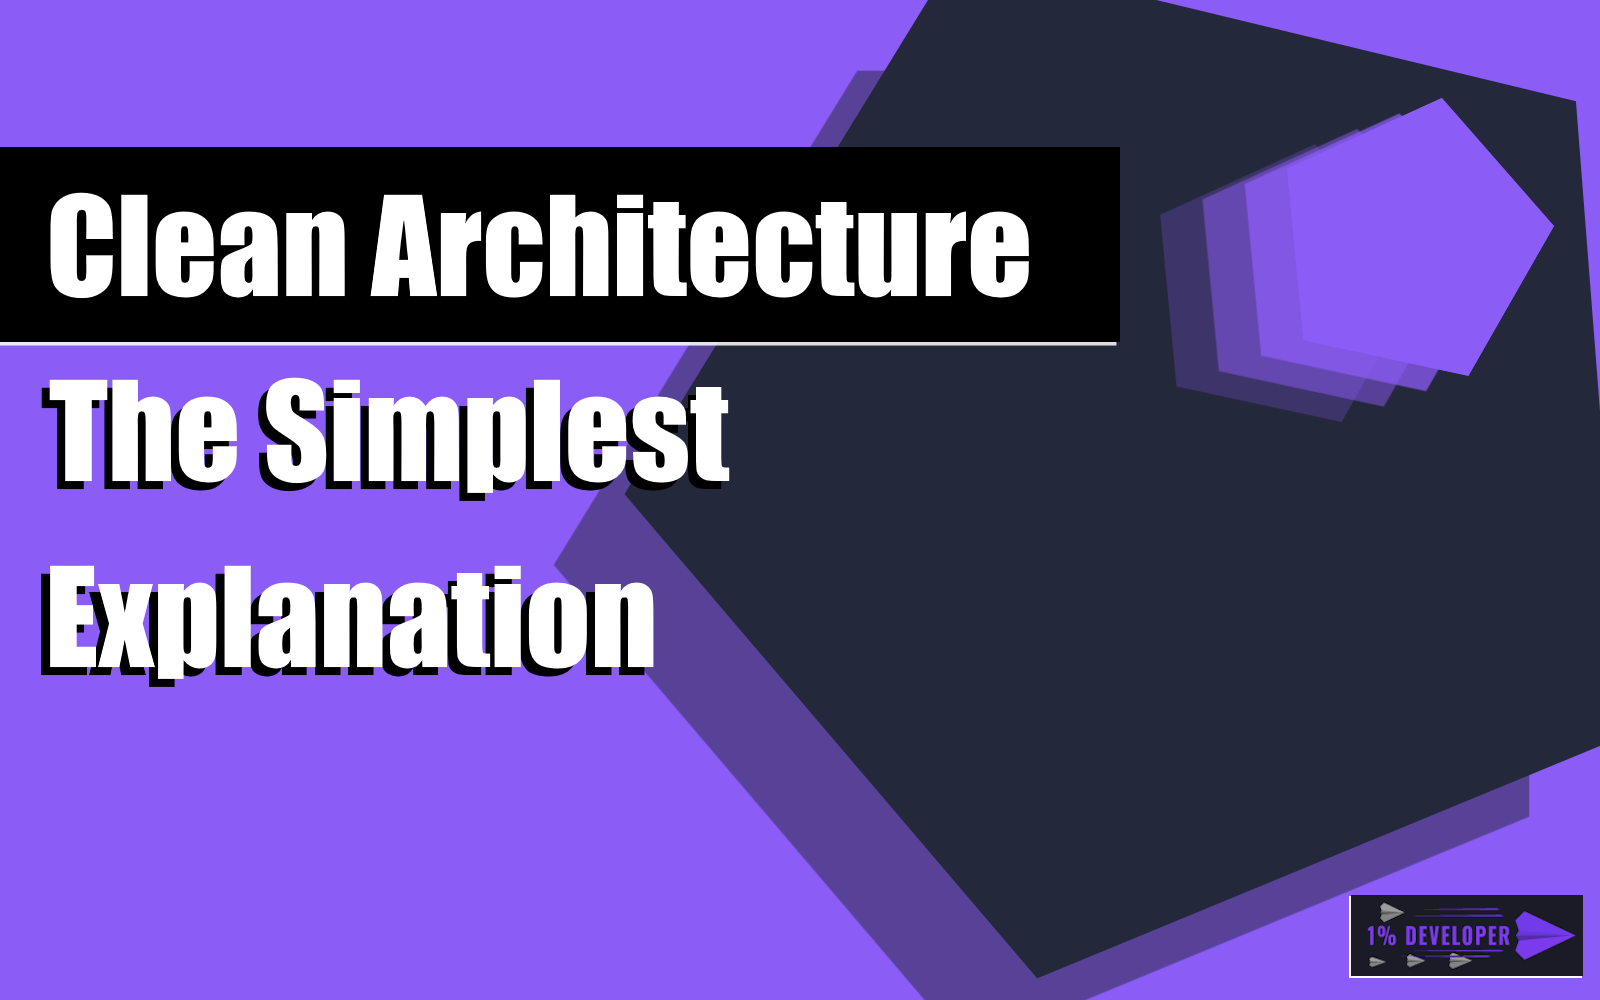 Clean Architecture - The Simplest Explanation